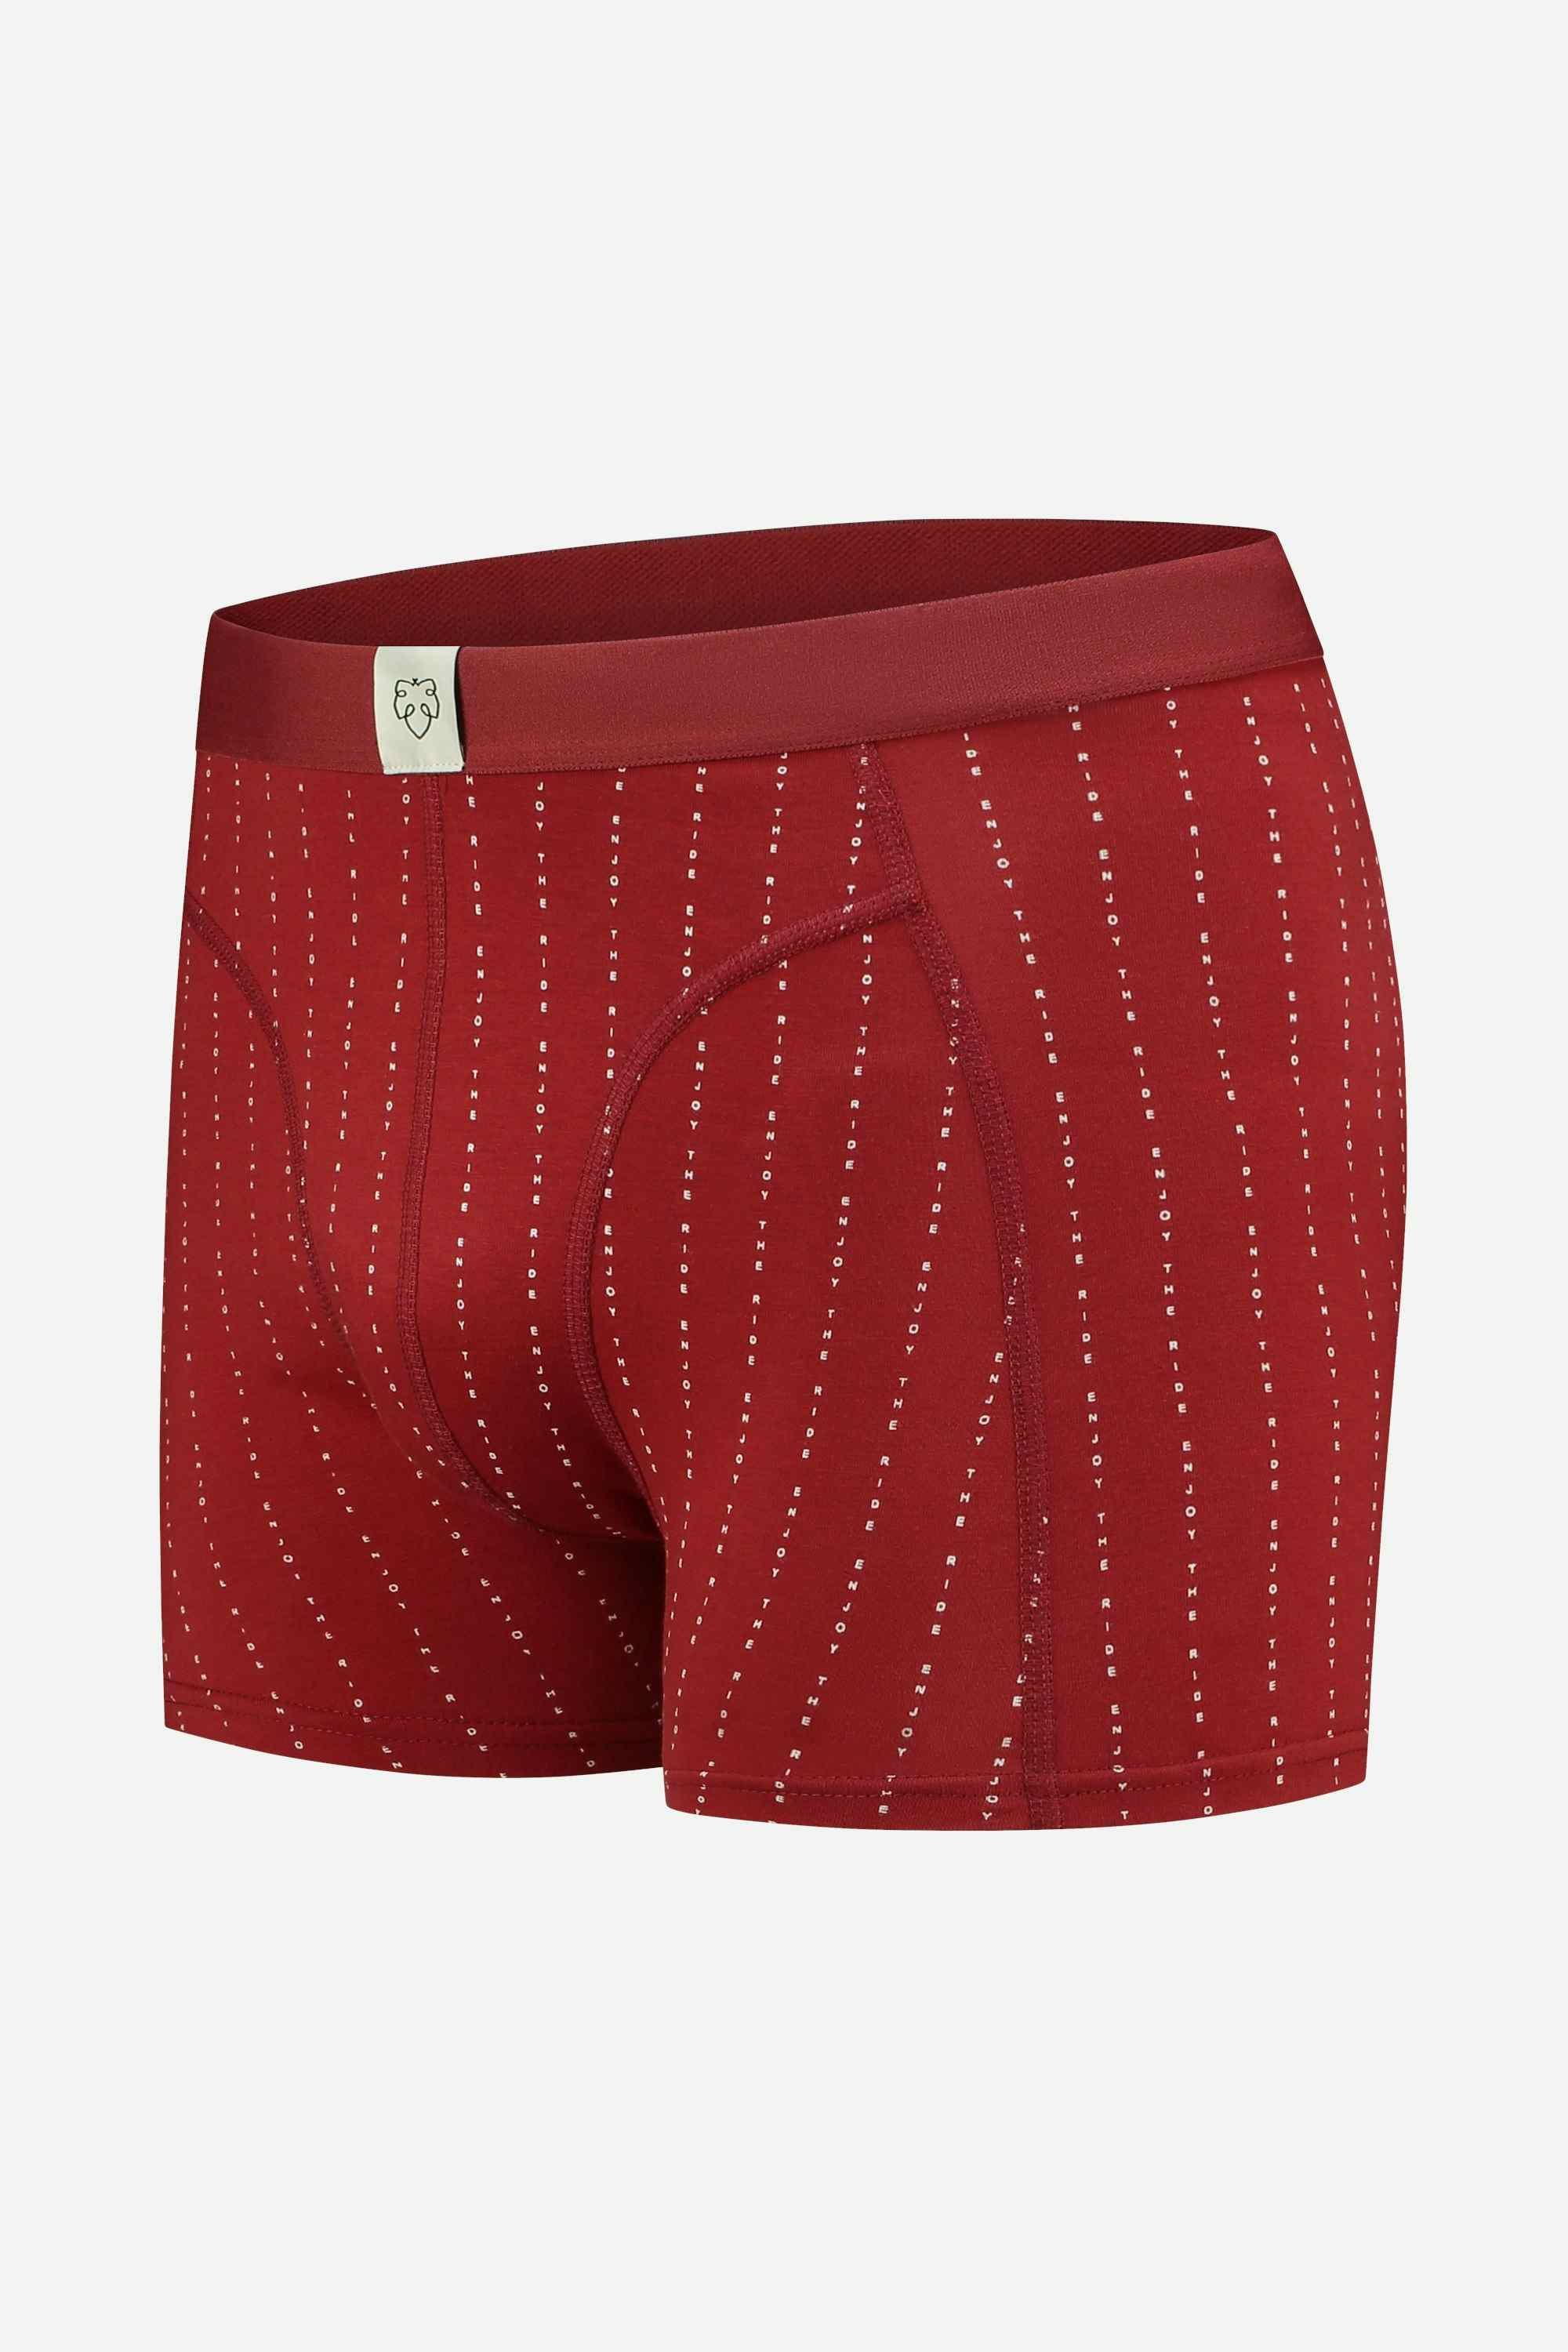 A-dam boxer brief with enjoy the ride from GOTS pure organic cotton | A-dam